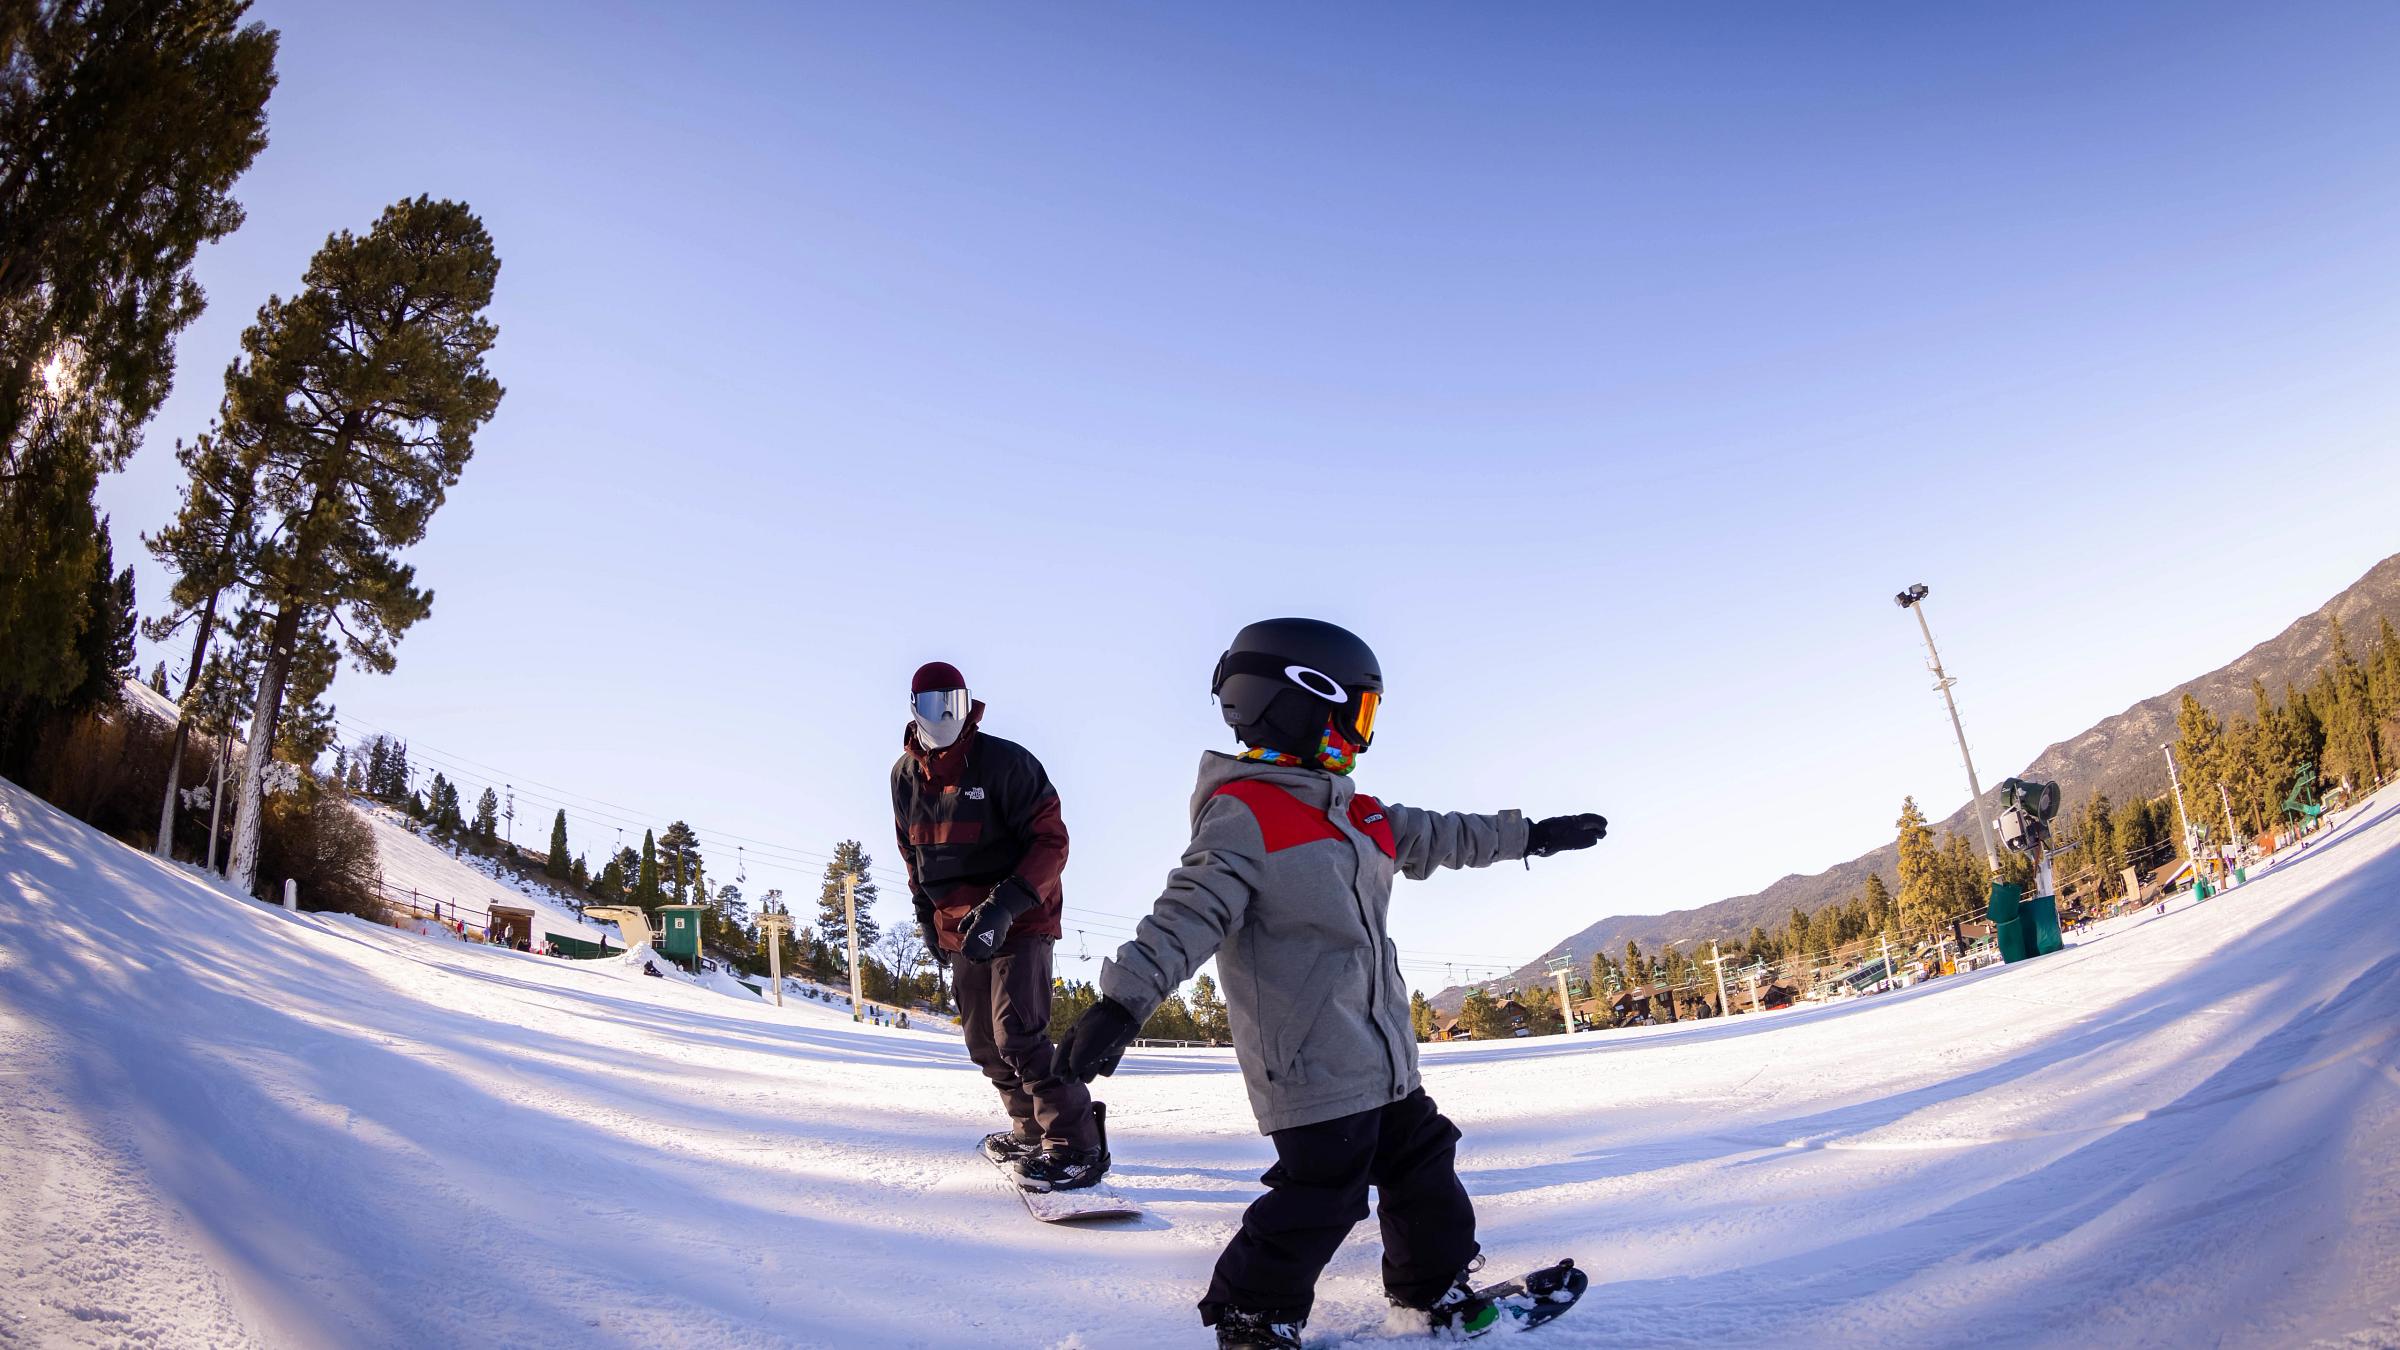 Father teaching son how to snowboard